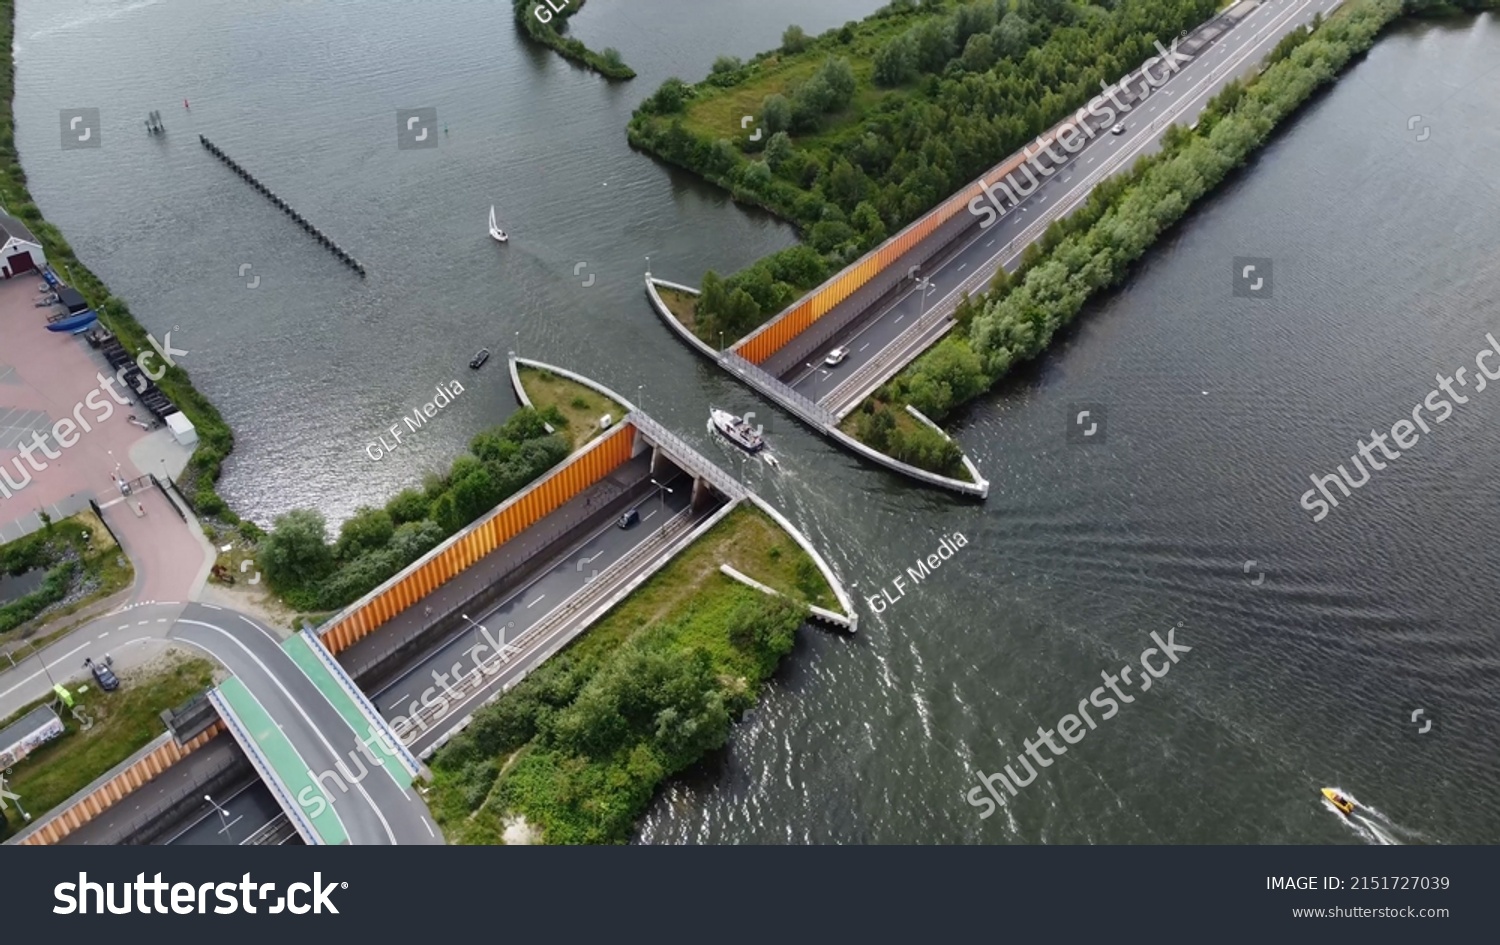 Aerial drone view of modern aqueduct or water bridge is constructed to convey watercourses across gaps showing a sailboat moving over the infrastructure and vehicles cars driving under 4k quality #2151727039